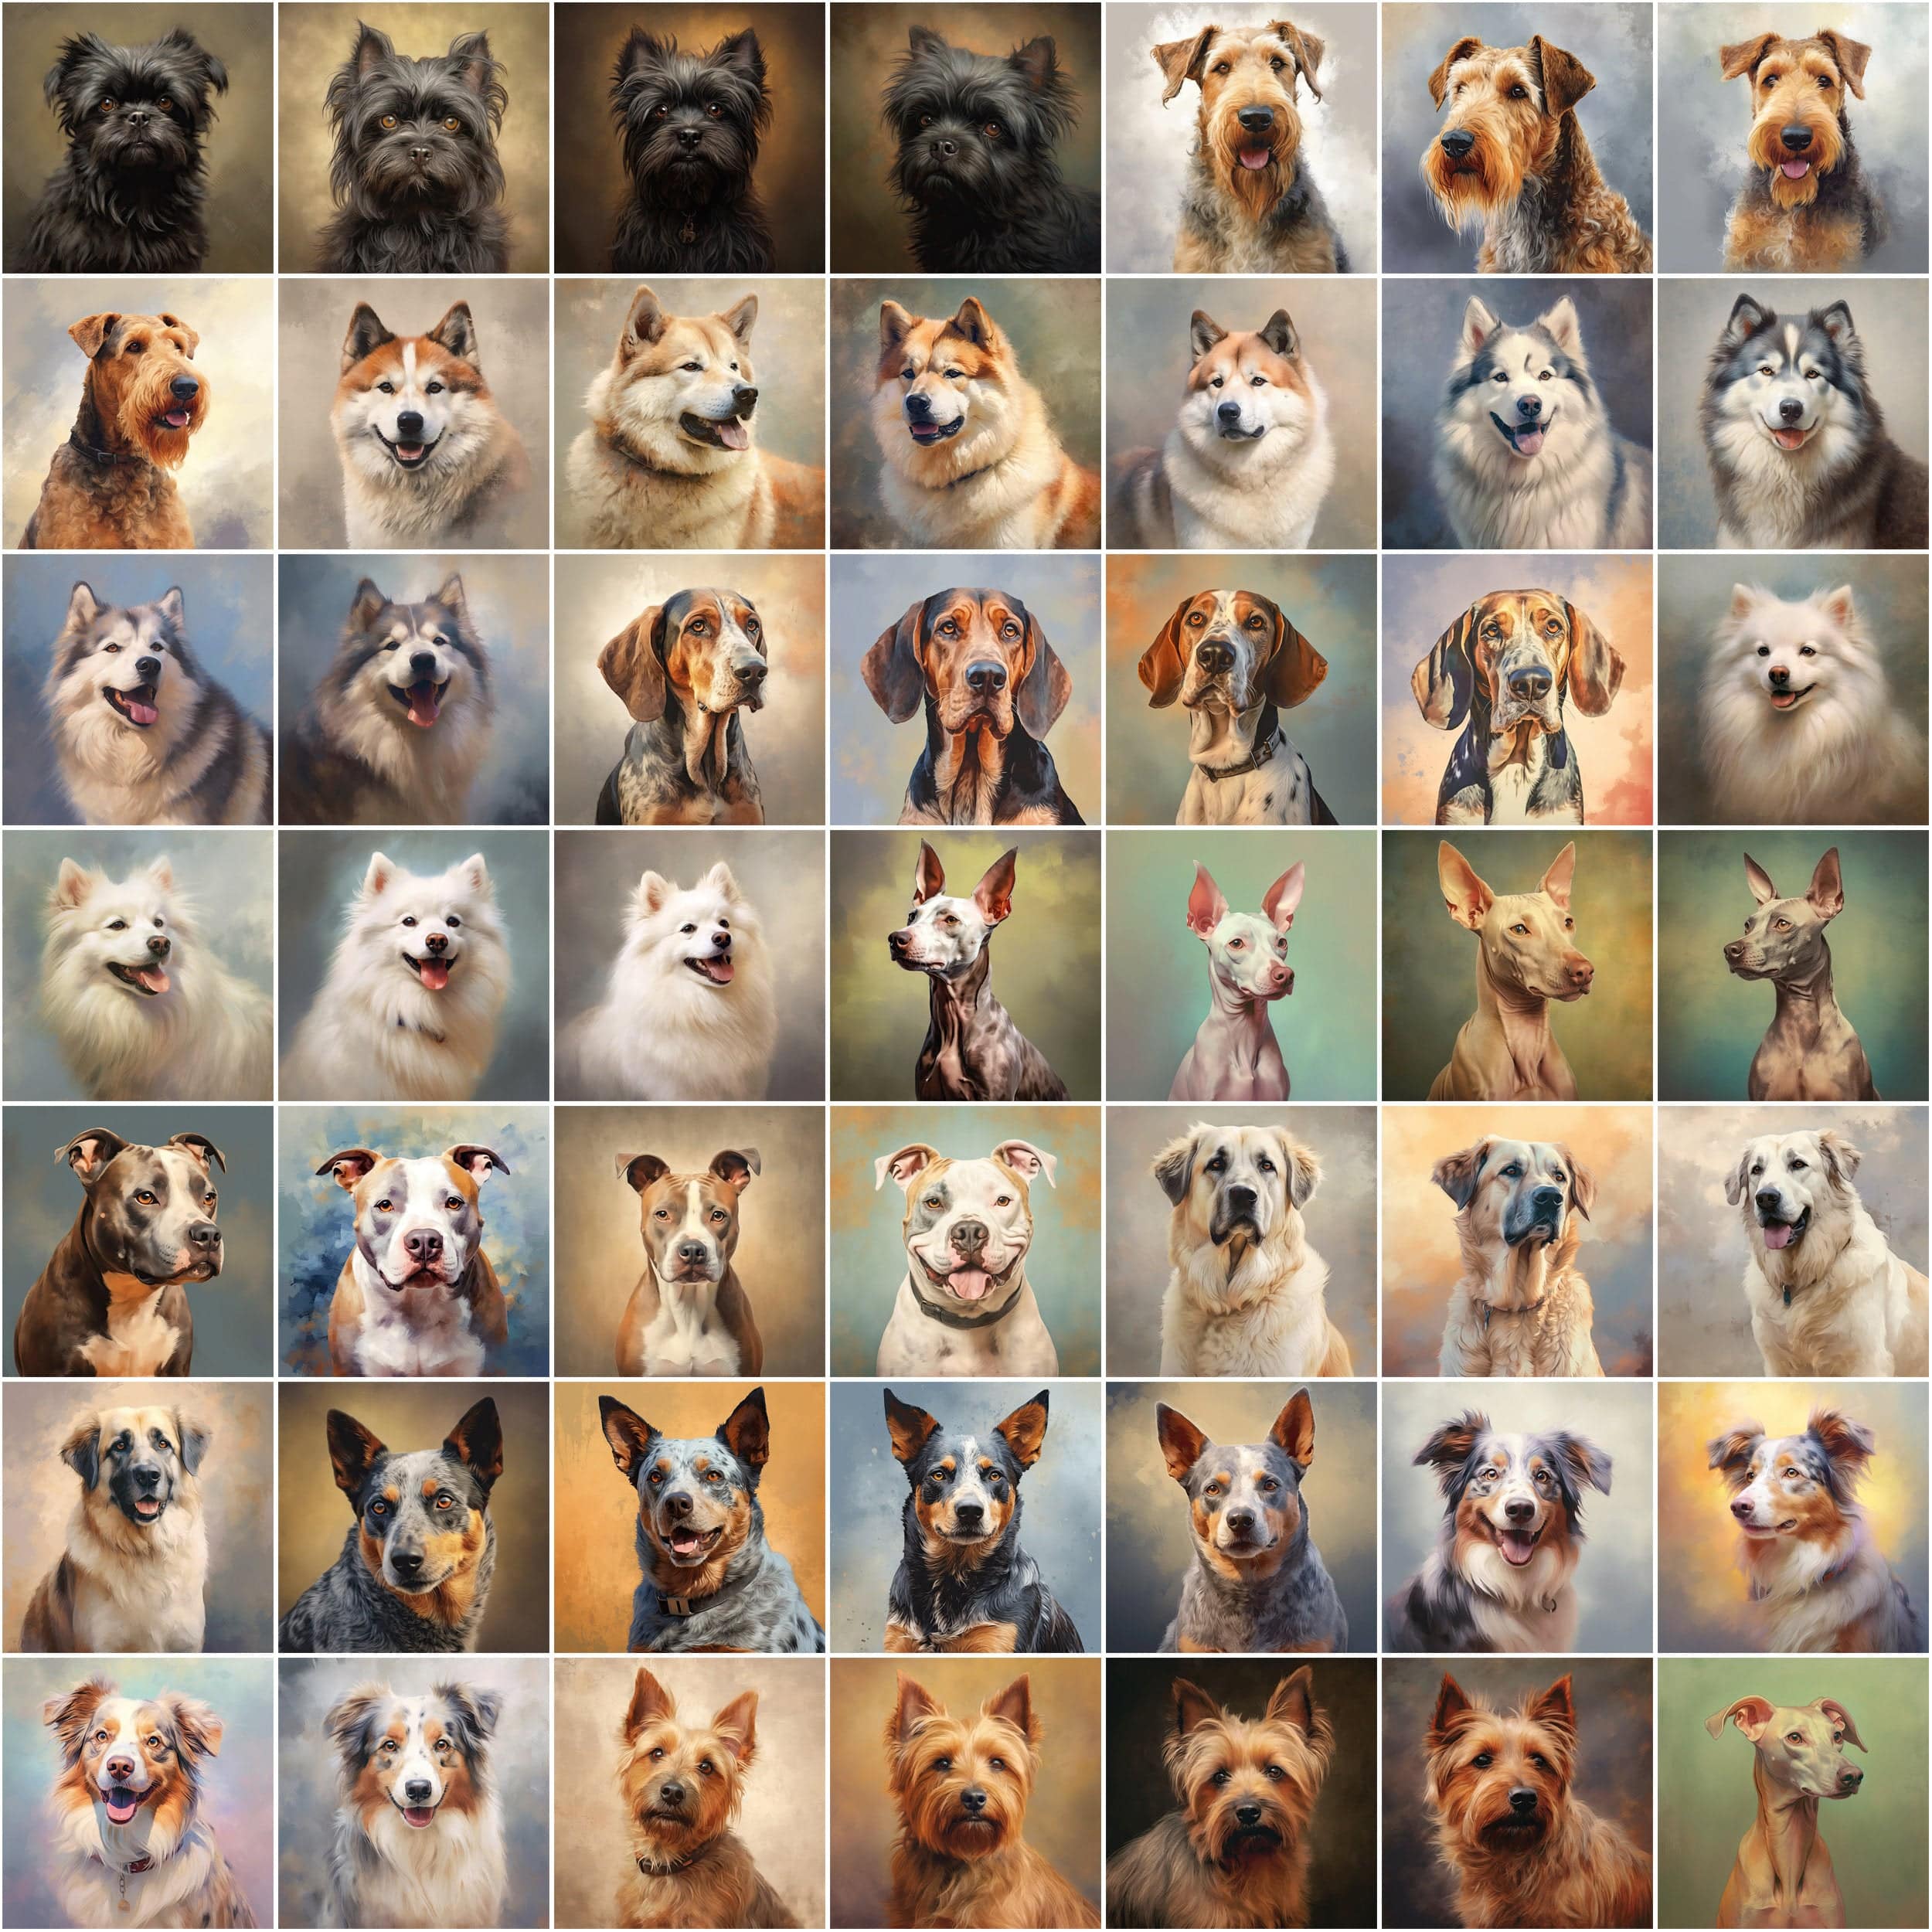 760 Oil Painting Dog Breed Images | Commercial License Included | High Resolution PNGs | Instant Download | Perfect for Pet Lovers Digital Download Sumobundle